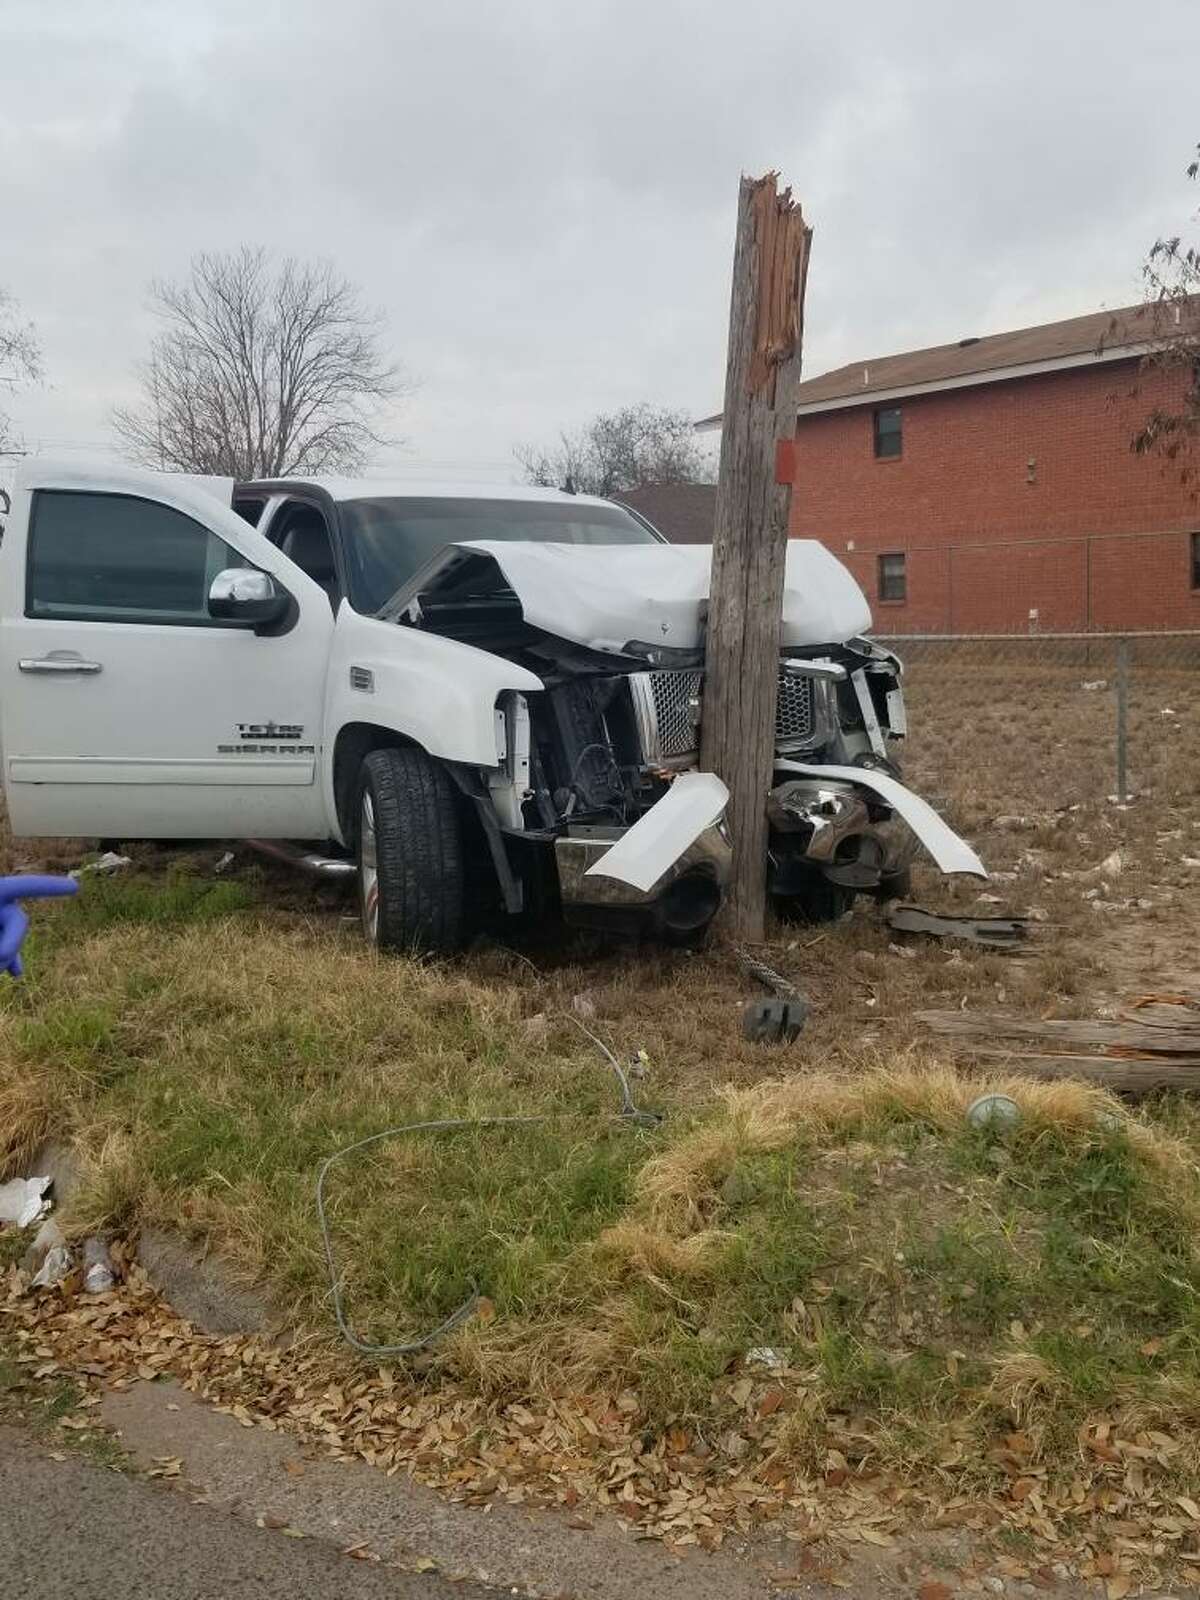 A GMC Sierra crashed into a utility pole early Friday in the intersection Pierce Street and Pinder Avenue. A male patient refused treatment or transportation to a local hospital.